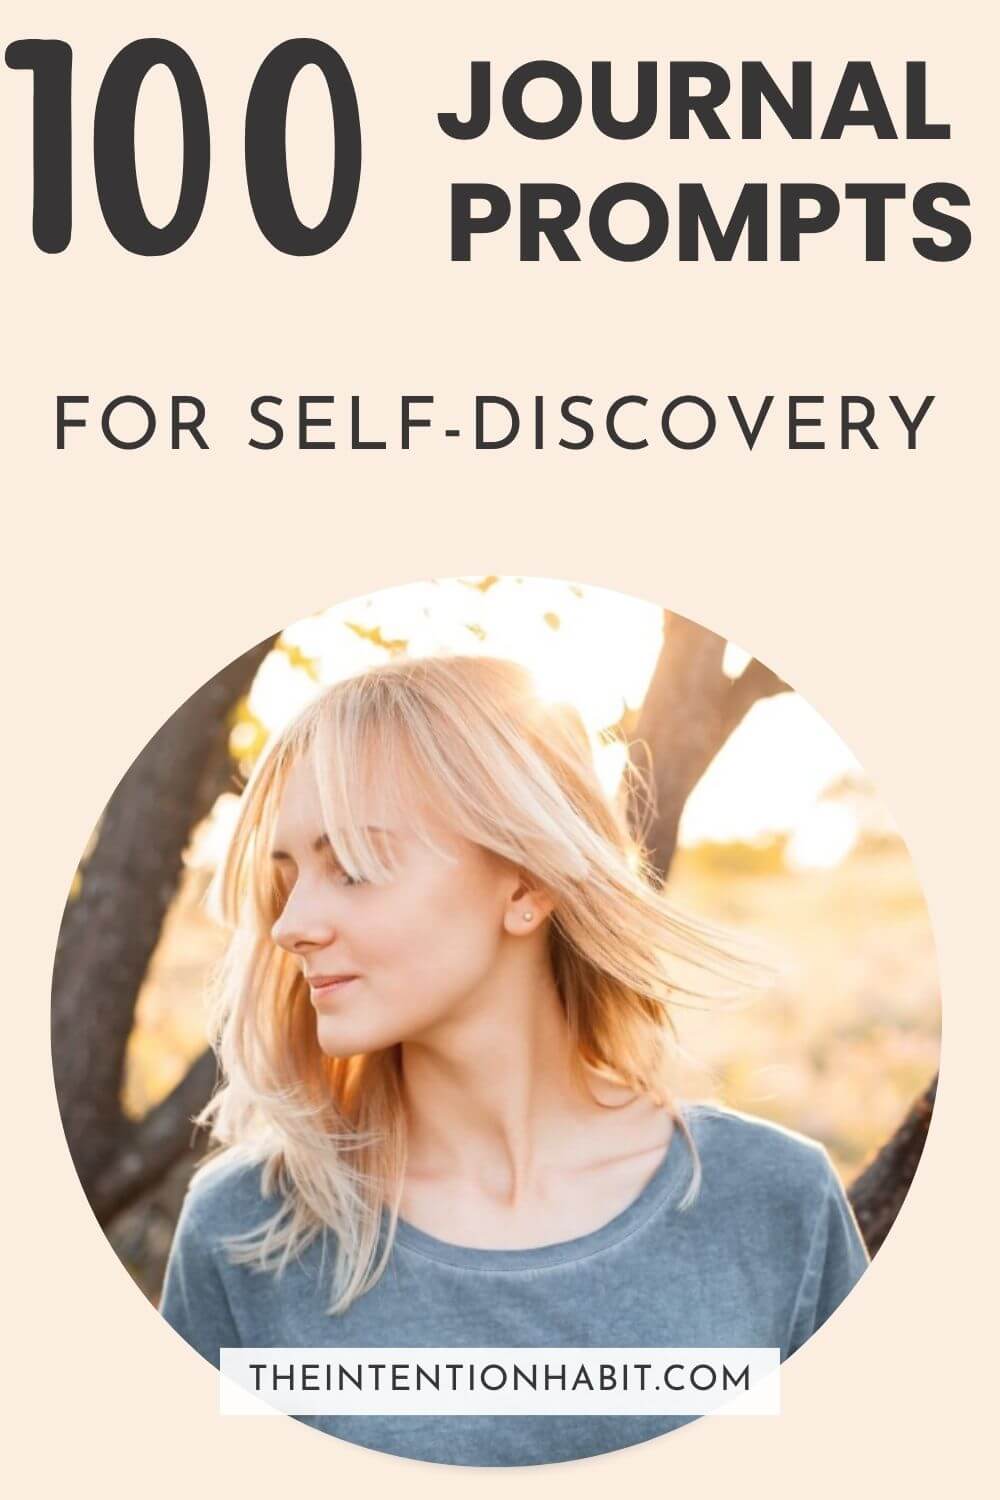 100 journal prompts for self discovery.